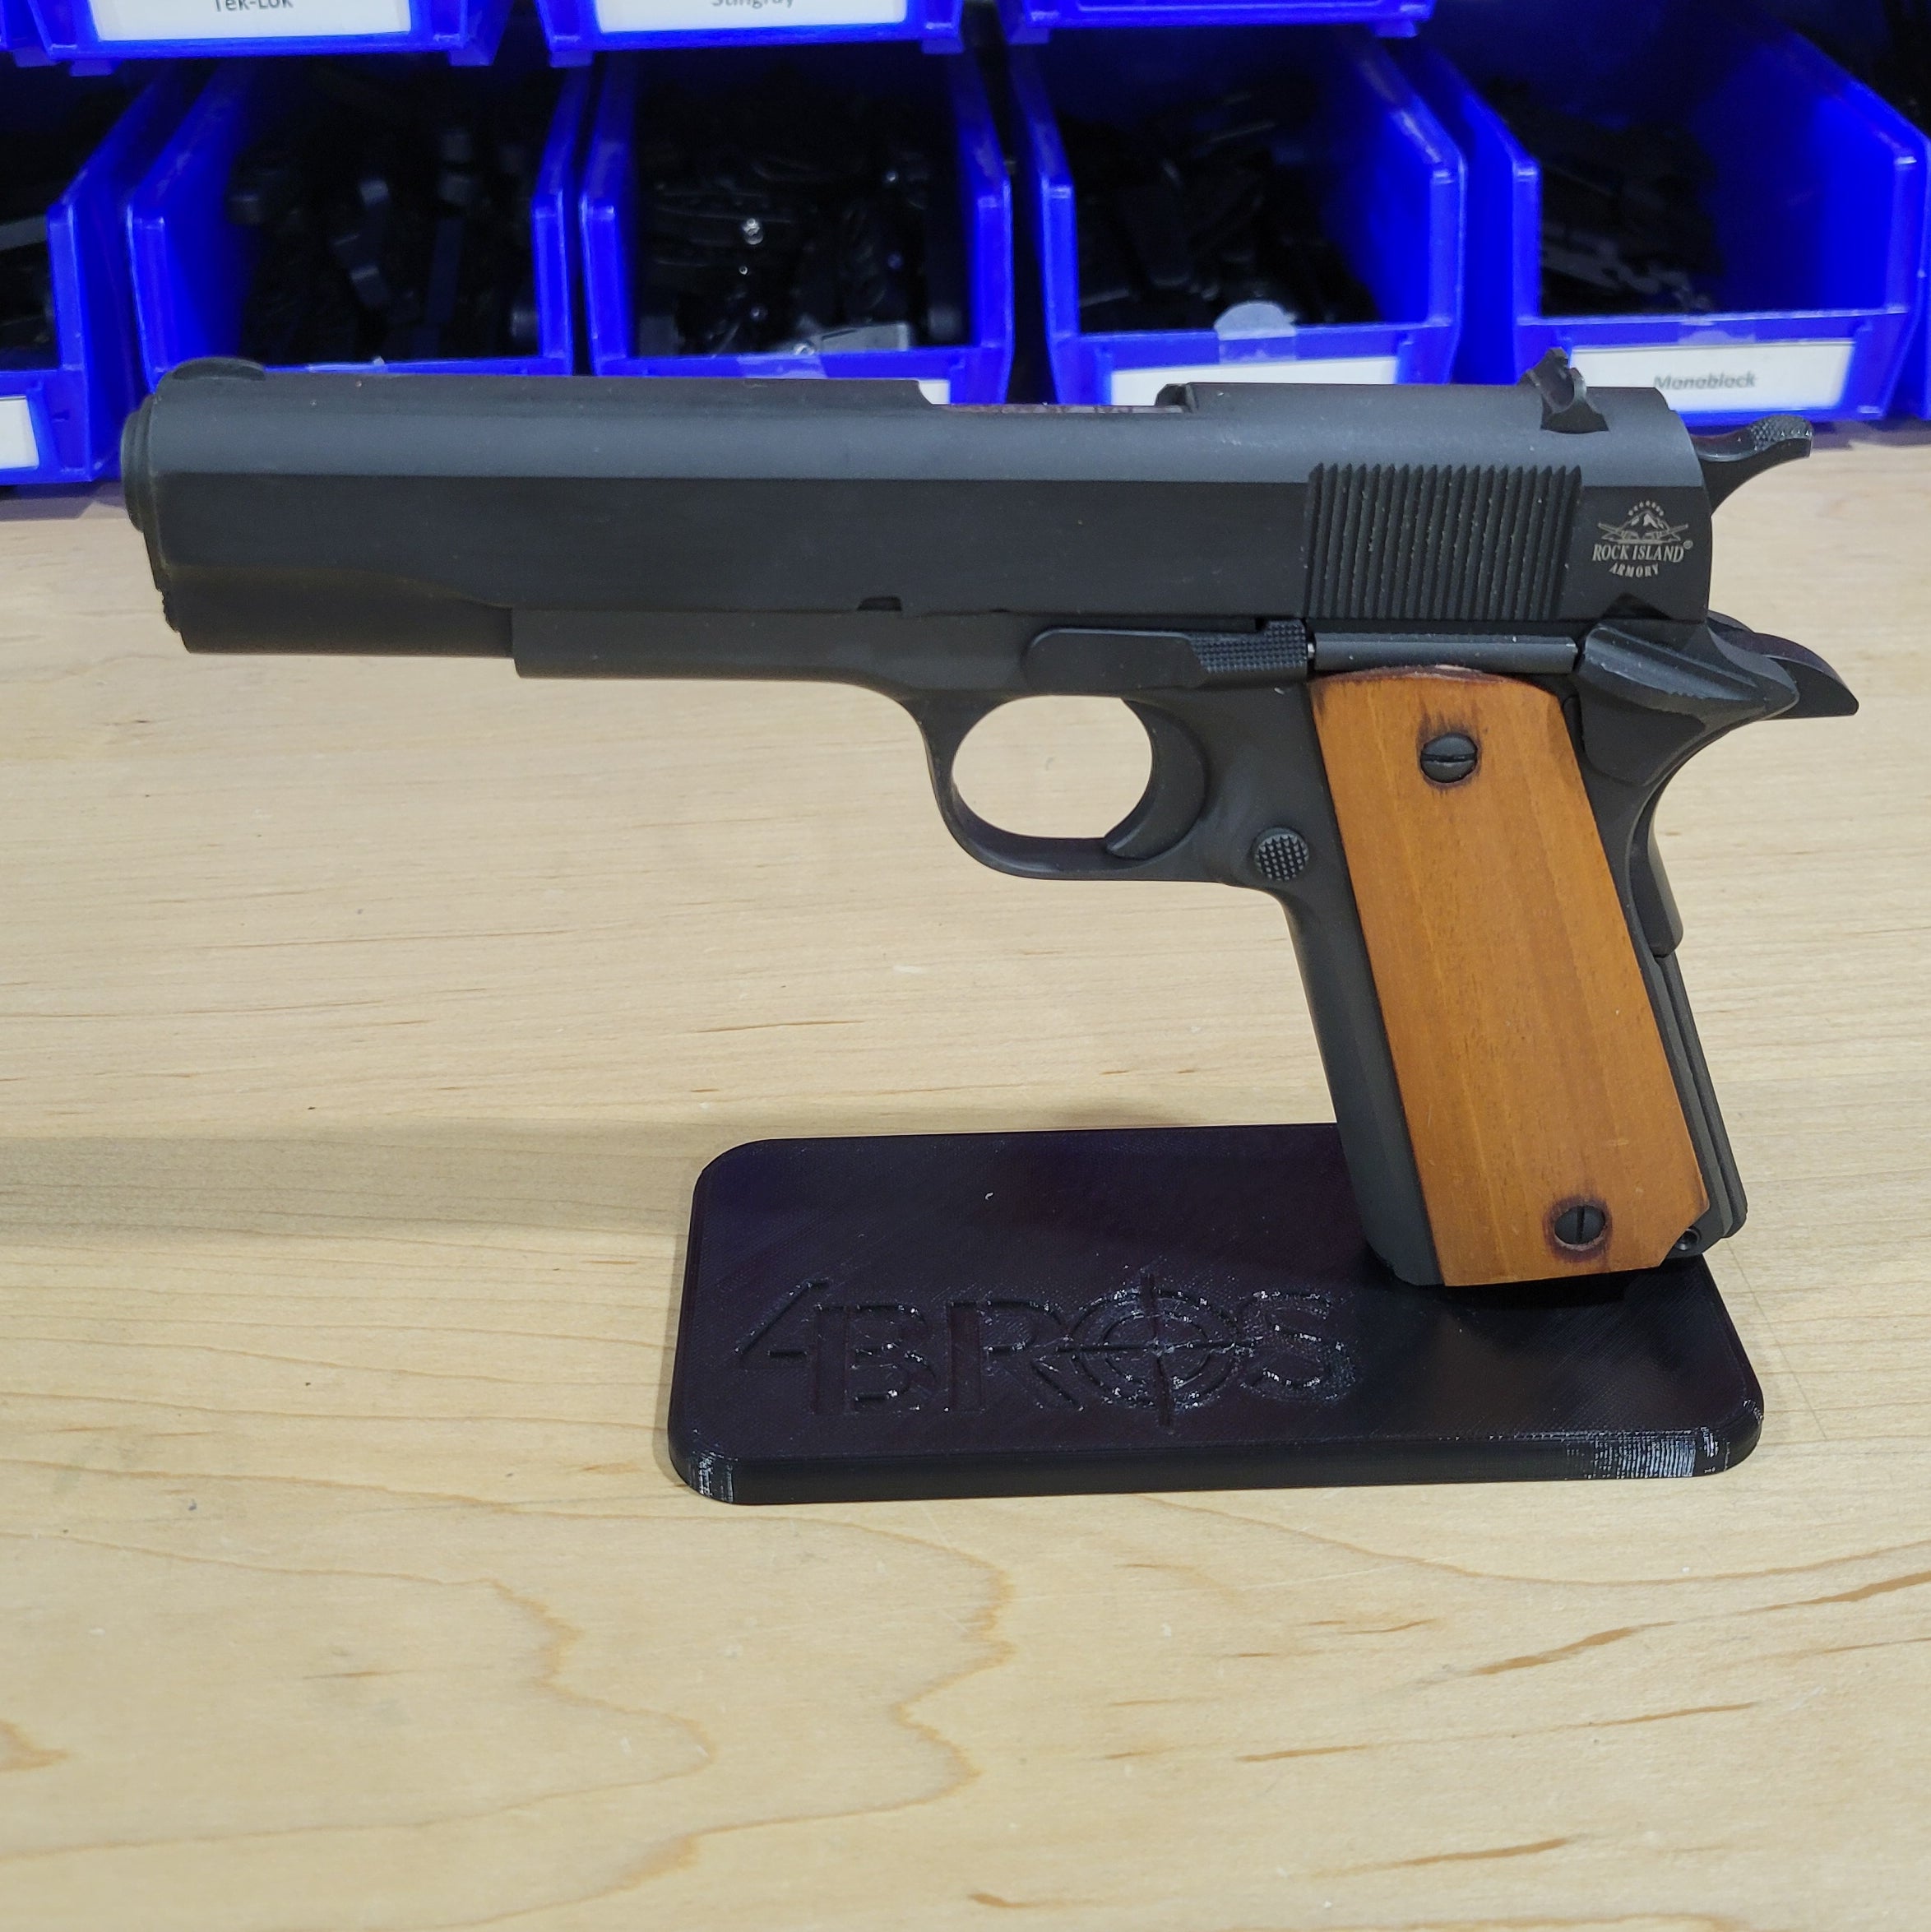 For the best 3D-printed 1911 Pistol Stand, perfect for storing and displaying your favorite handgun, shop Four Brothers Holsters. Printed in the USA with PETG plastic. This is a must-have for anyone wanting to display their favorite 1911 firearm. It also works well for storing handguns in a gun safe.